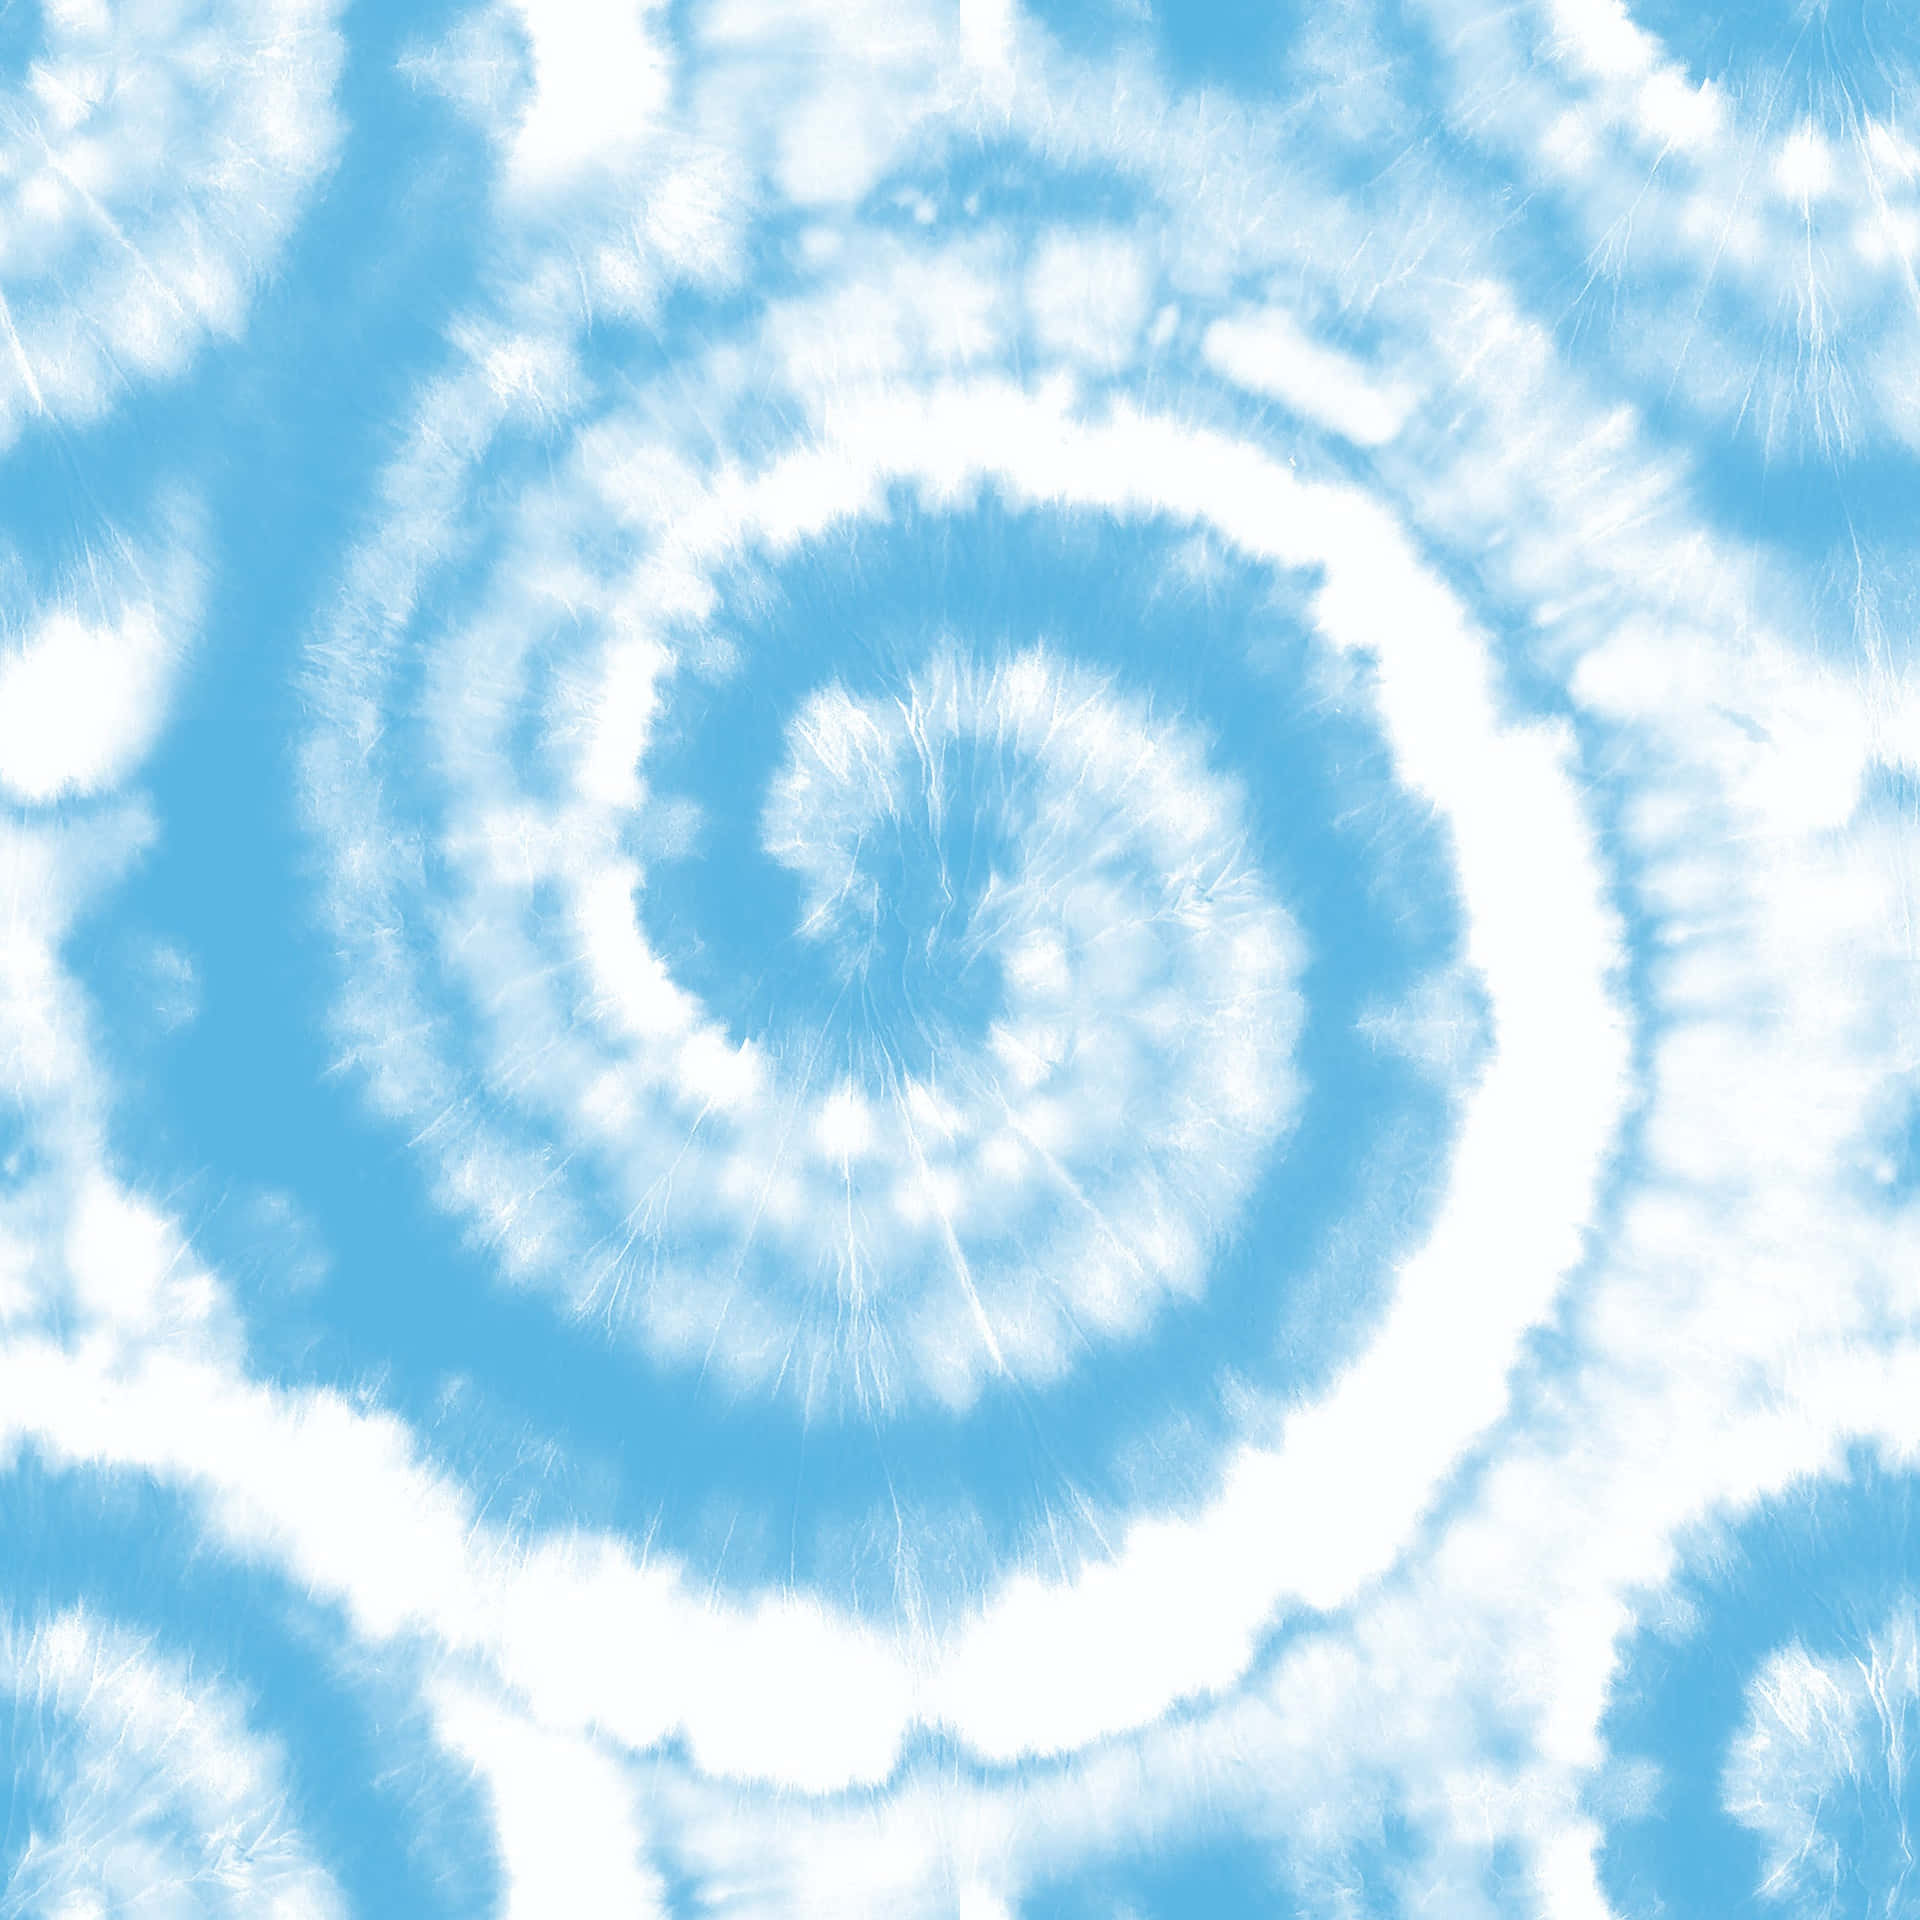 Funky blue tie-dye pattern with vibrantly colored swirls